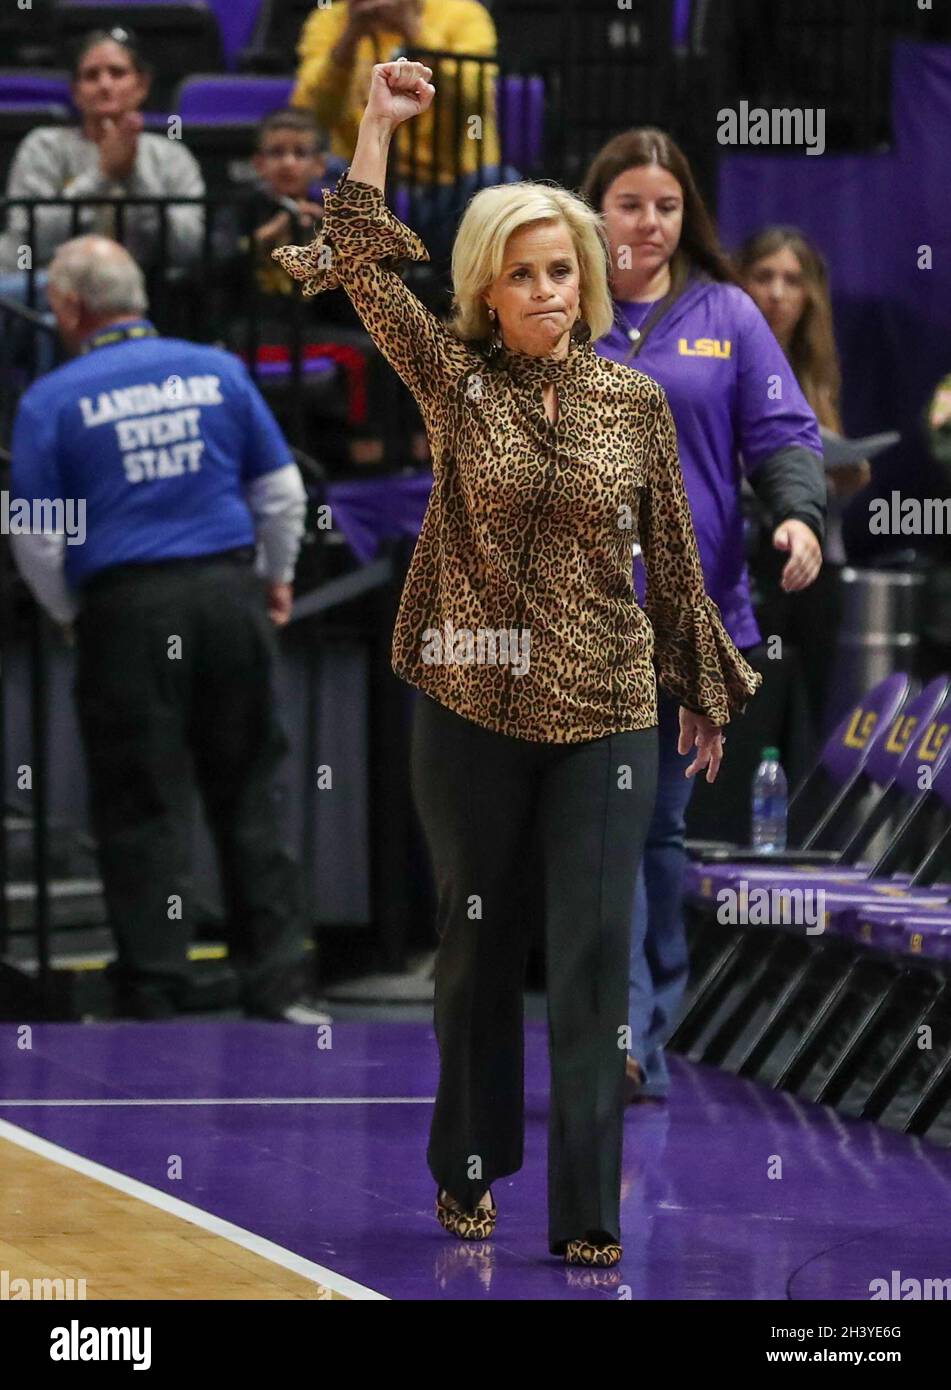 Baton Rouge, LA, USA. 30th Oct, 2021. LSU Head Coach Kim Mulkey is  announced to the audience before NCAA Women's Basketball action between the  Langston Lions and the LSU Tigers at the